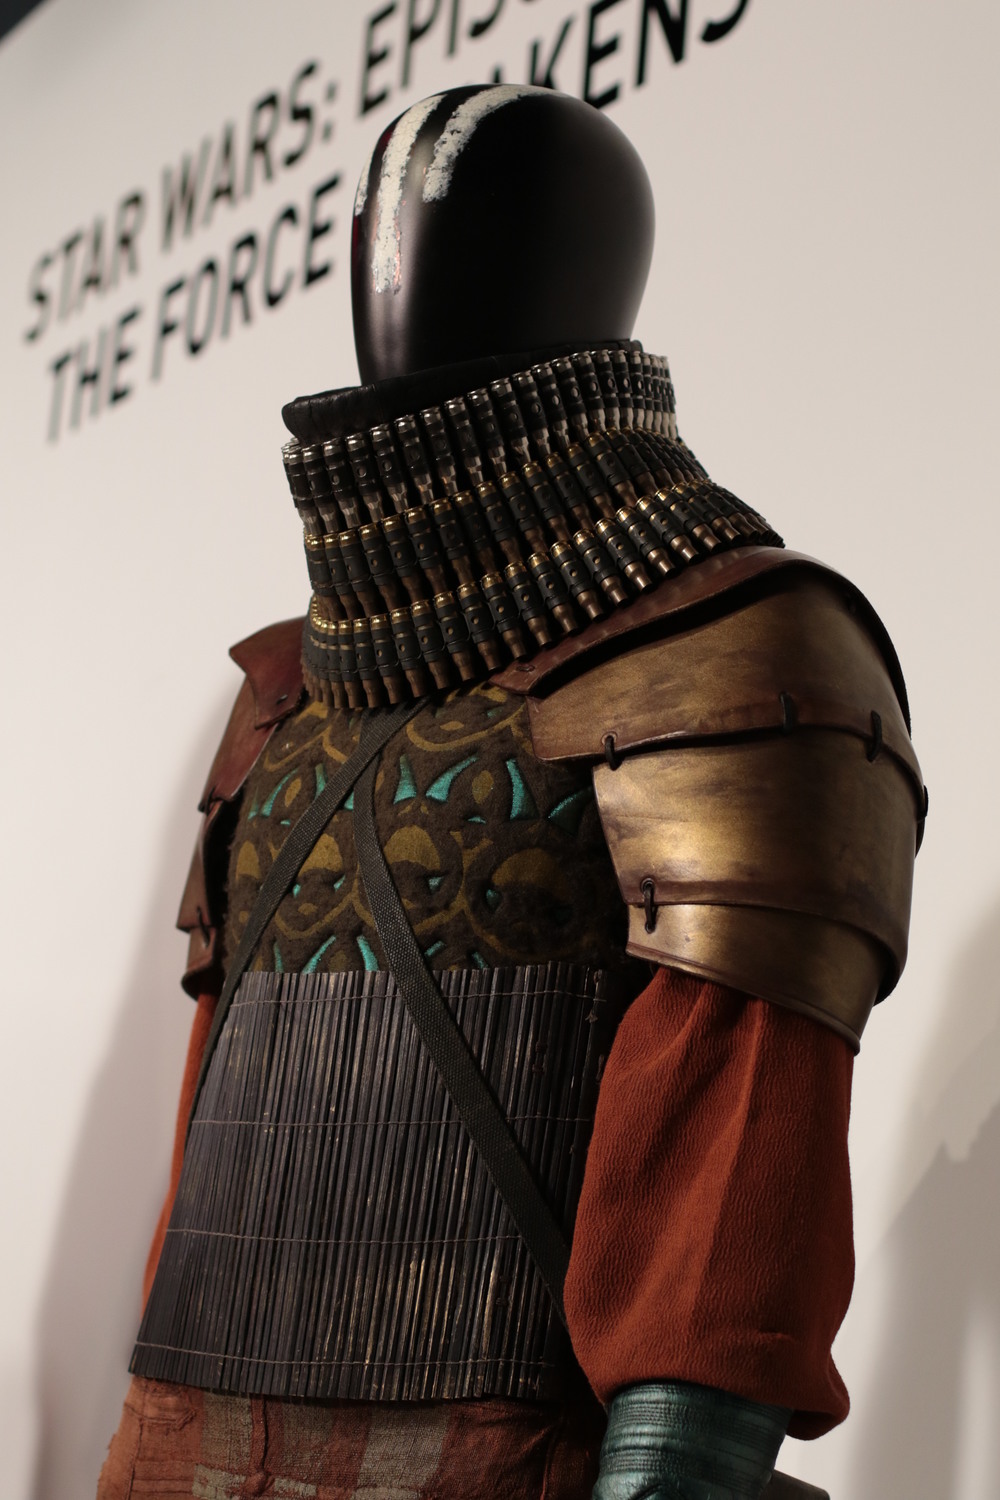  Star Wars: Episode VII - The Force Awakens costumes by Michael Kaplan, . These costumes can be seen in the 24th Annual "Art of Motion Picture Costume Design" exhibition, FIDM Museum, Fashion Institute of Design &amp; Merchandising, Los Angeles. The 